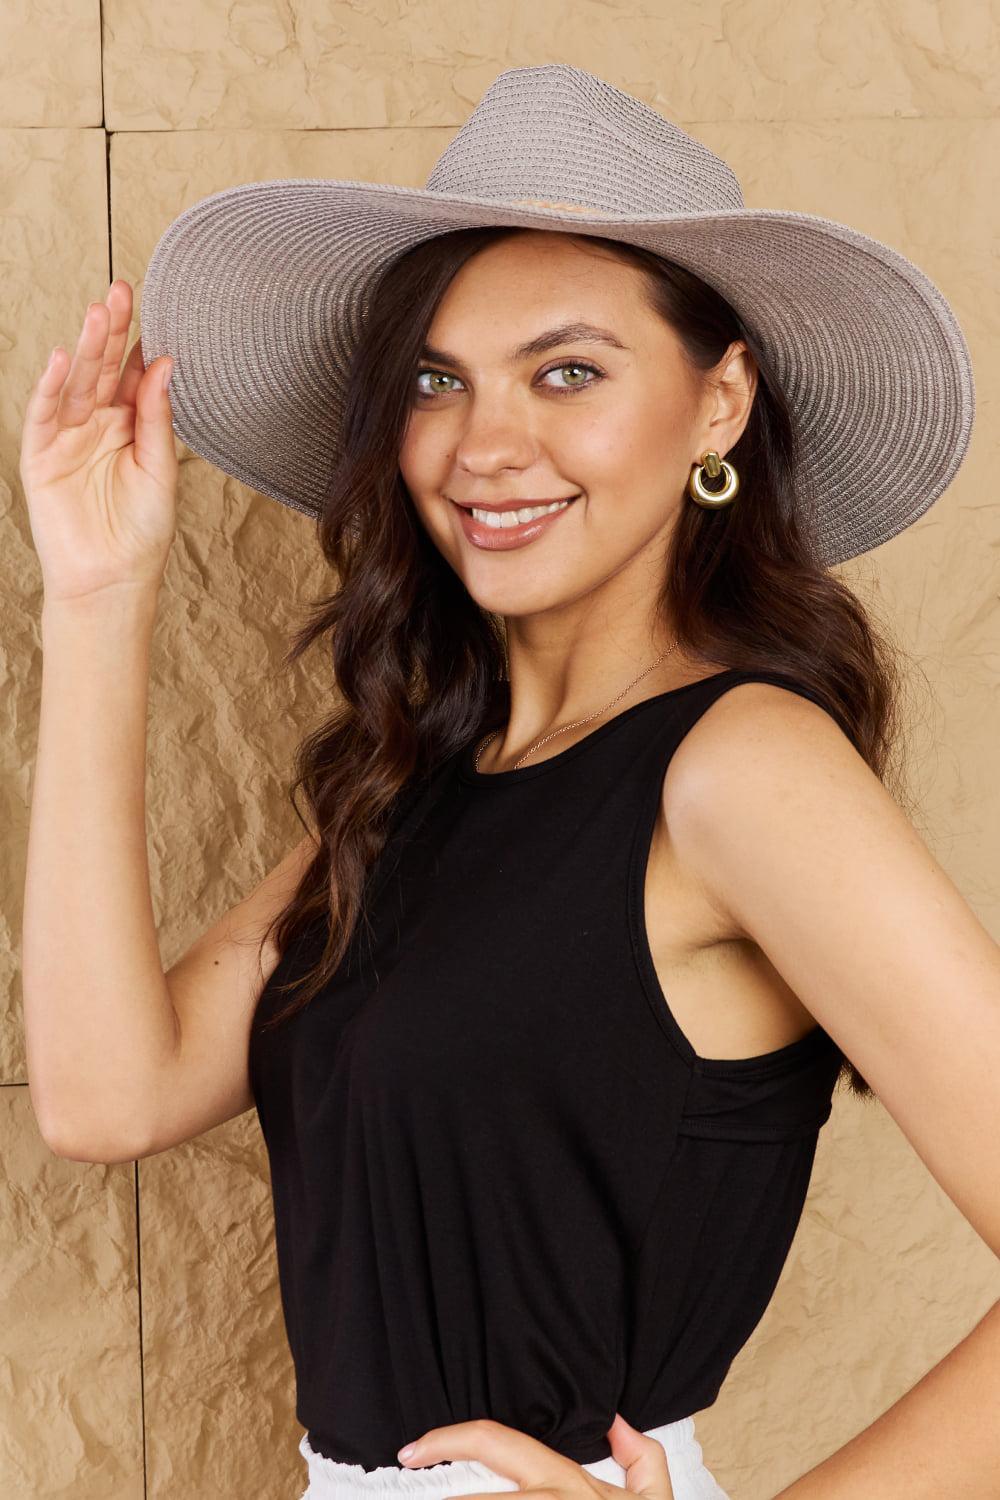 a woman in a hat poses for a picture